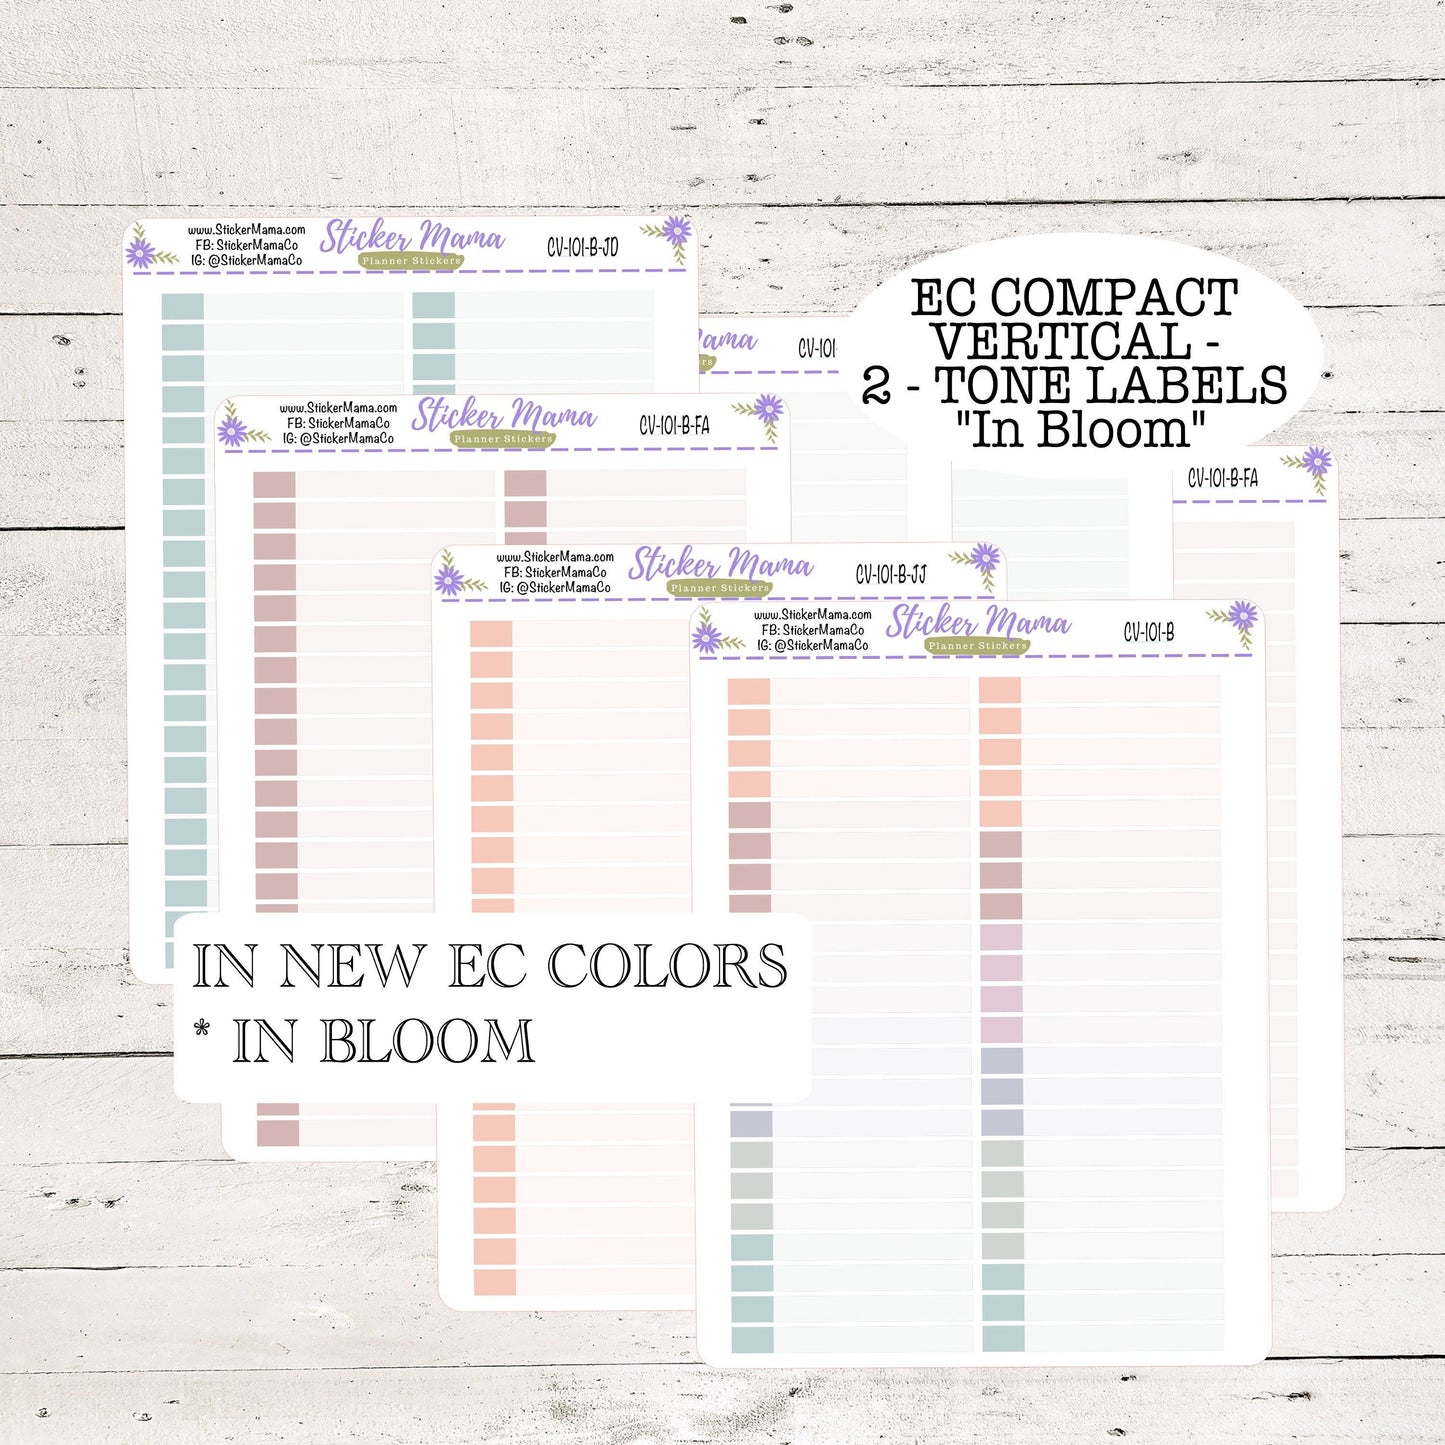 CV-101 TWO TONED Labels - In Bloom Erin Condren Compact Vertical - Bloom, Harmony, Harmony Neutral, Colorblends - Basic Labels - Planner